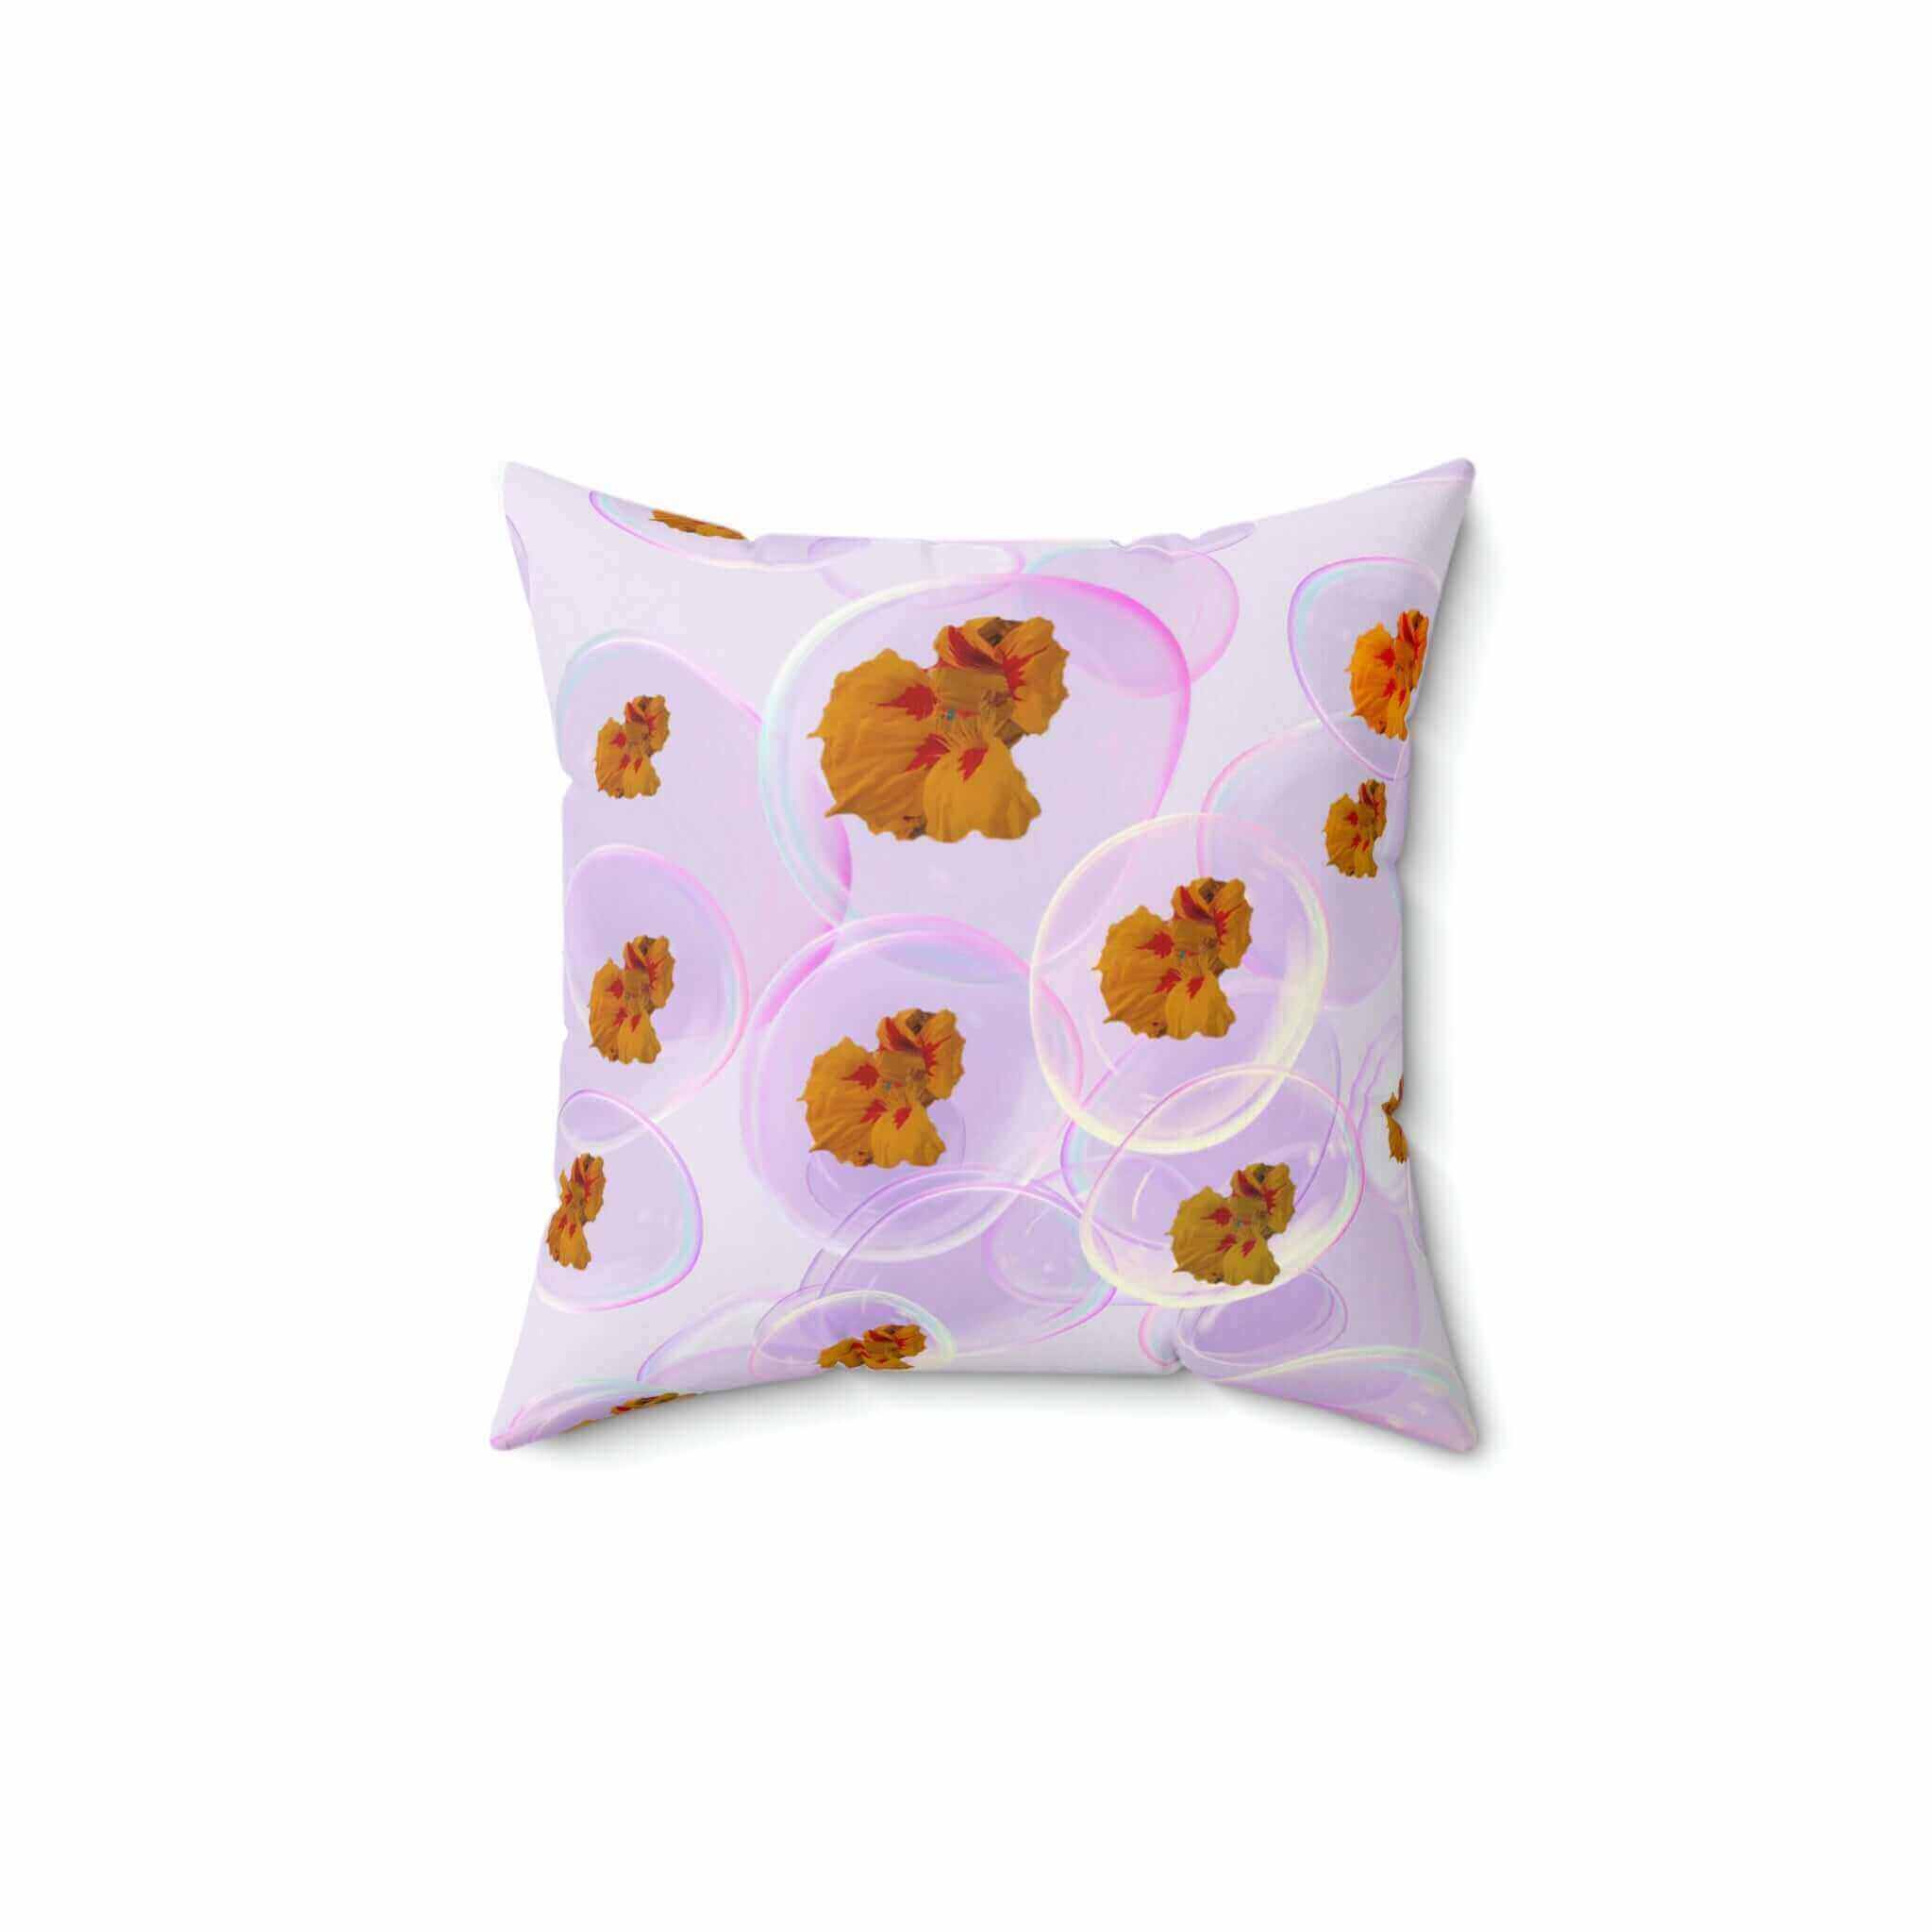 Bubbly Design Pillow - Hearth Home & Living